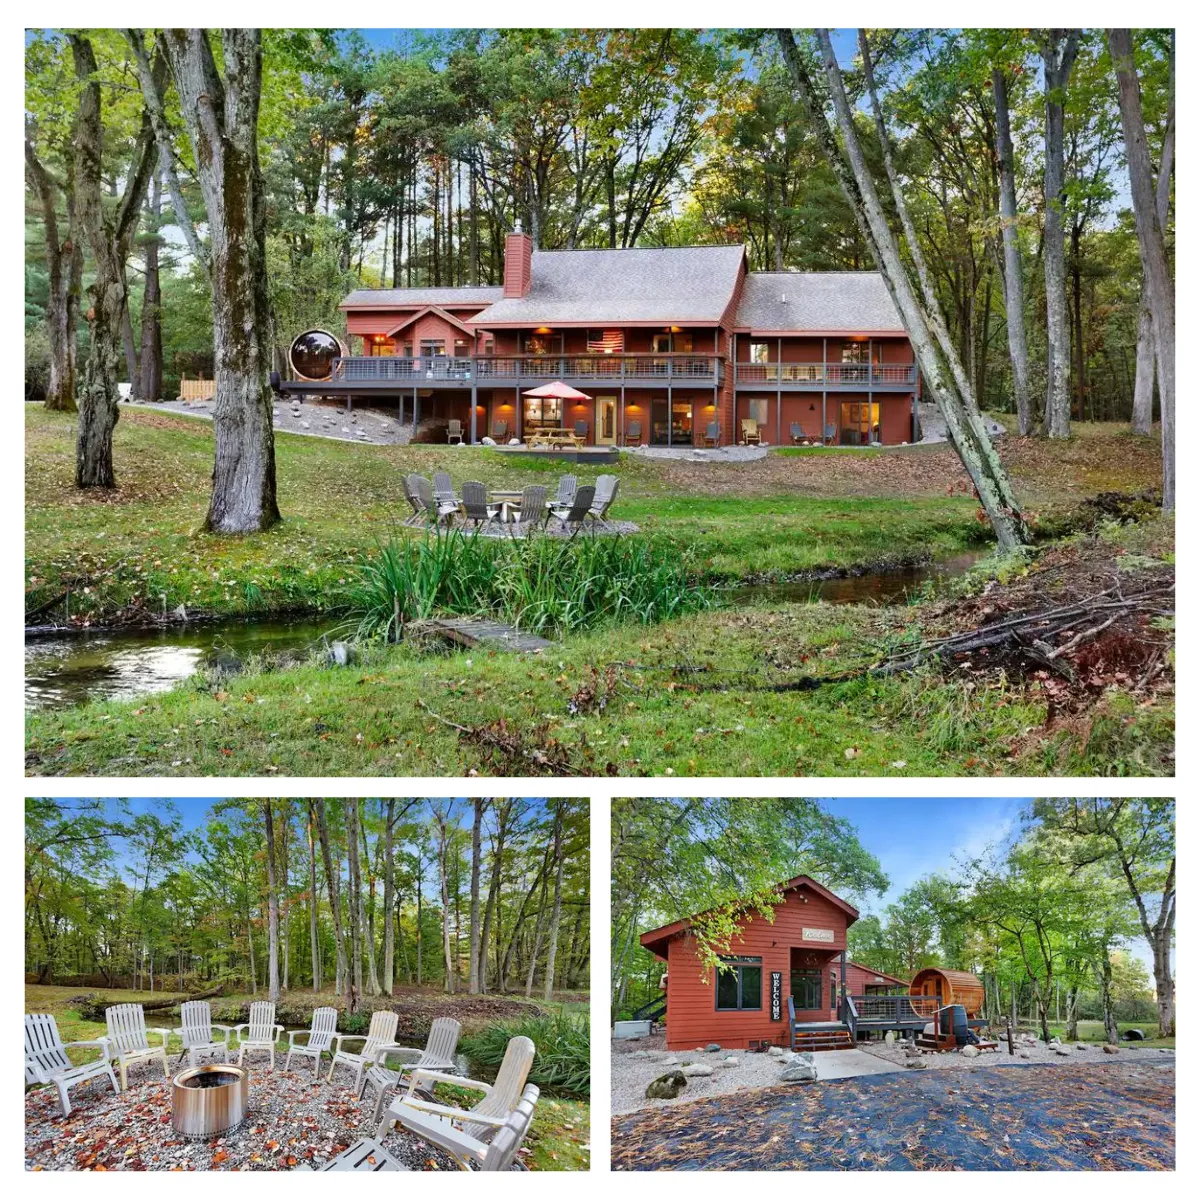 Hall Creek Lodge in Interlochen, Michigan, nestled in nature, offers six comfy bedrooms surrounded by trees on 5 acres, with a cozy living room and a kitchen for cooking.